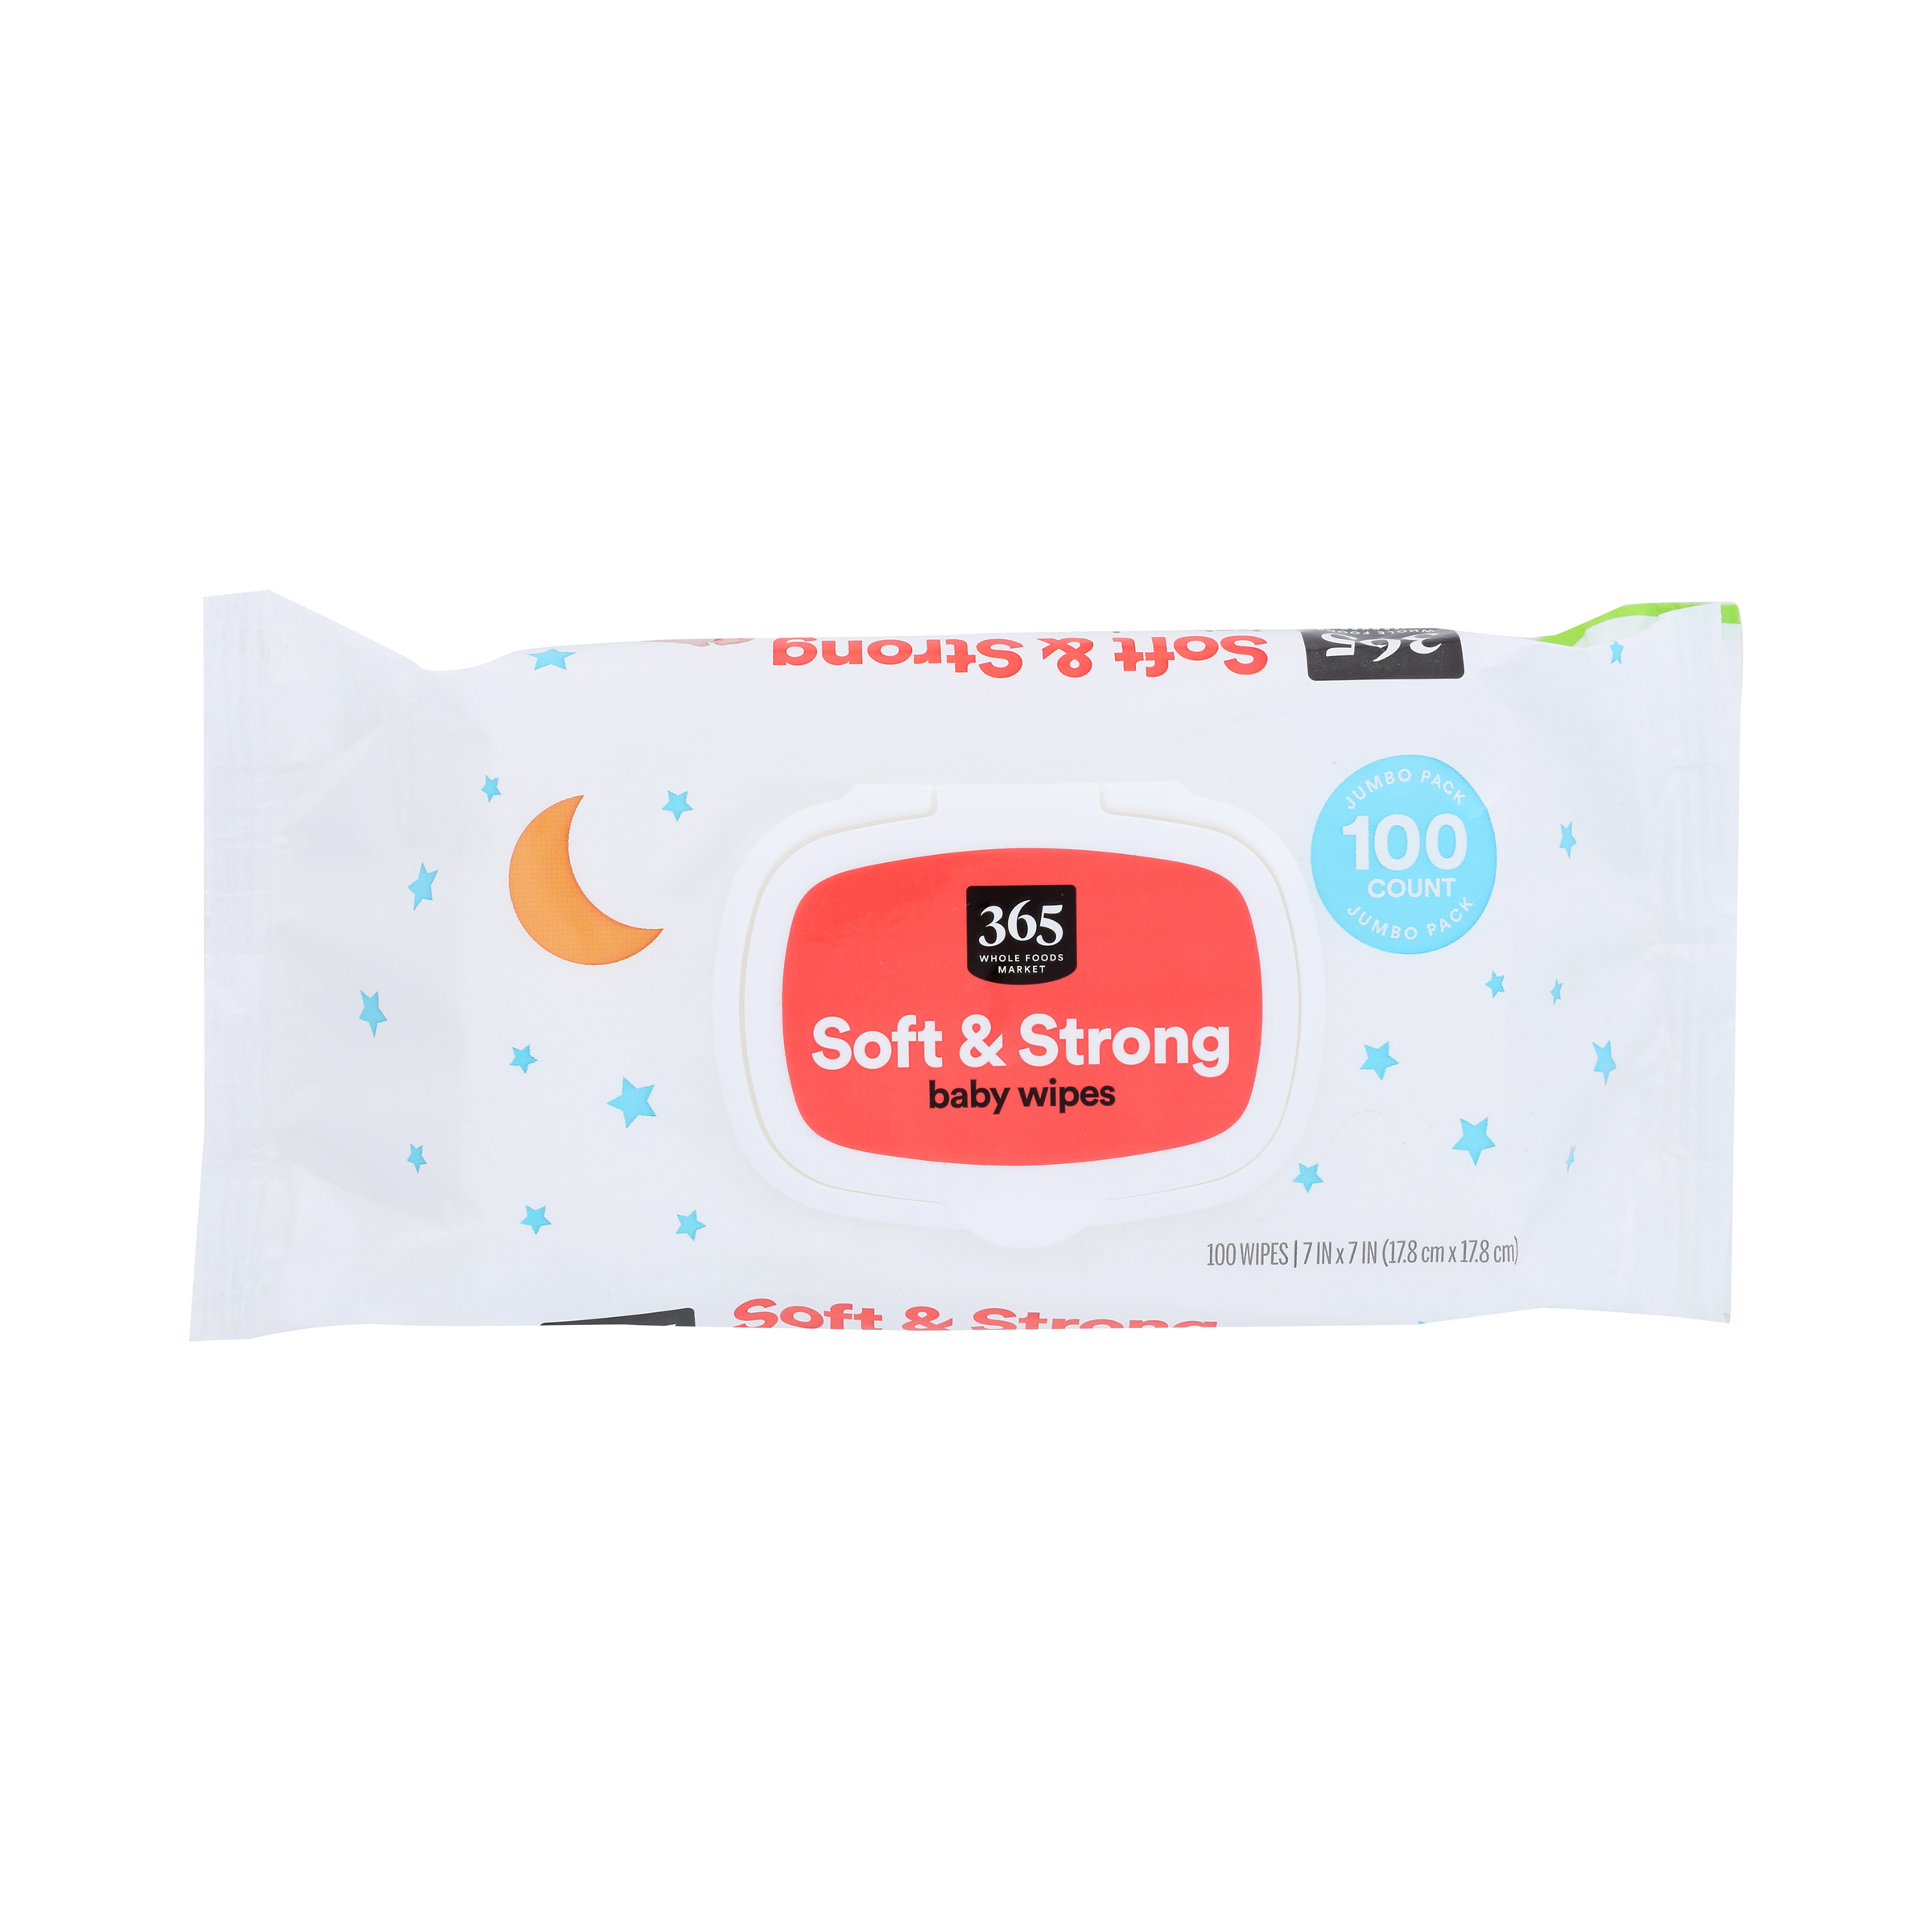 Soft \u0026 Strong Baby Wipes, 100 wipes 